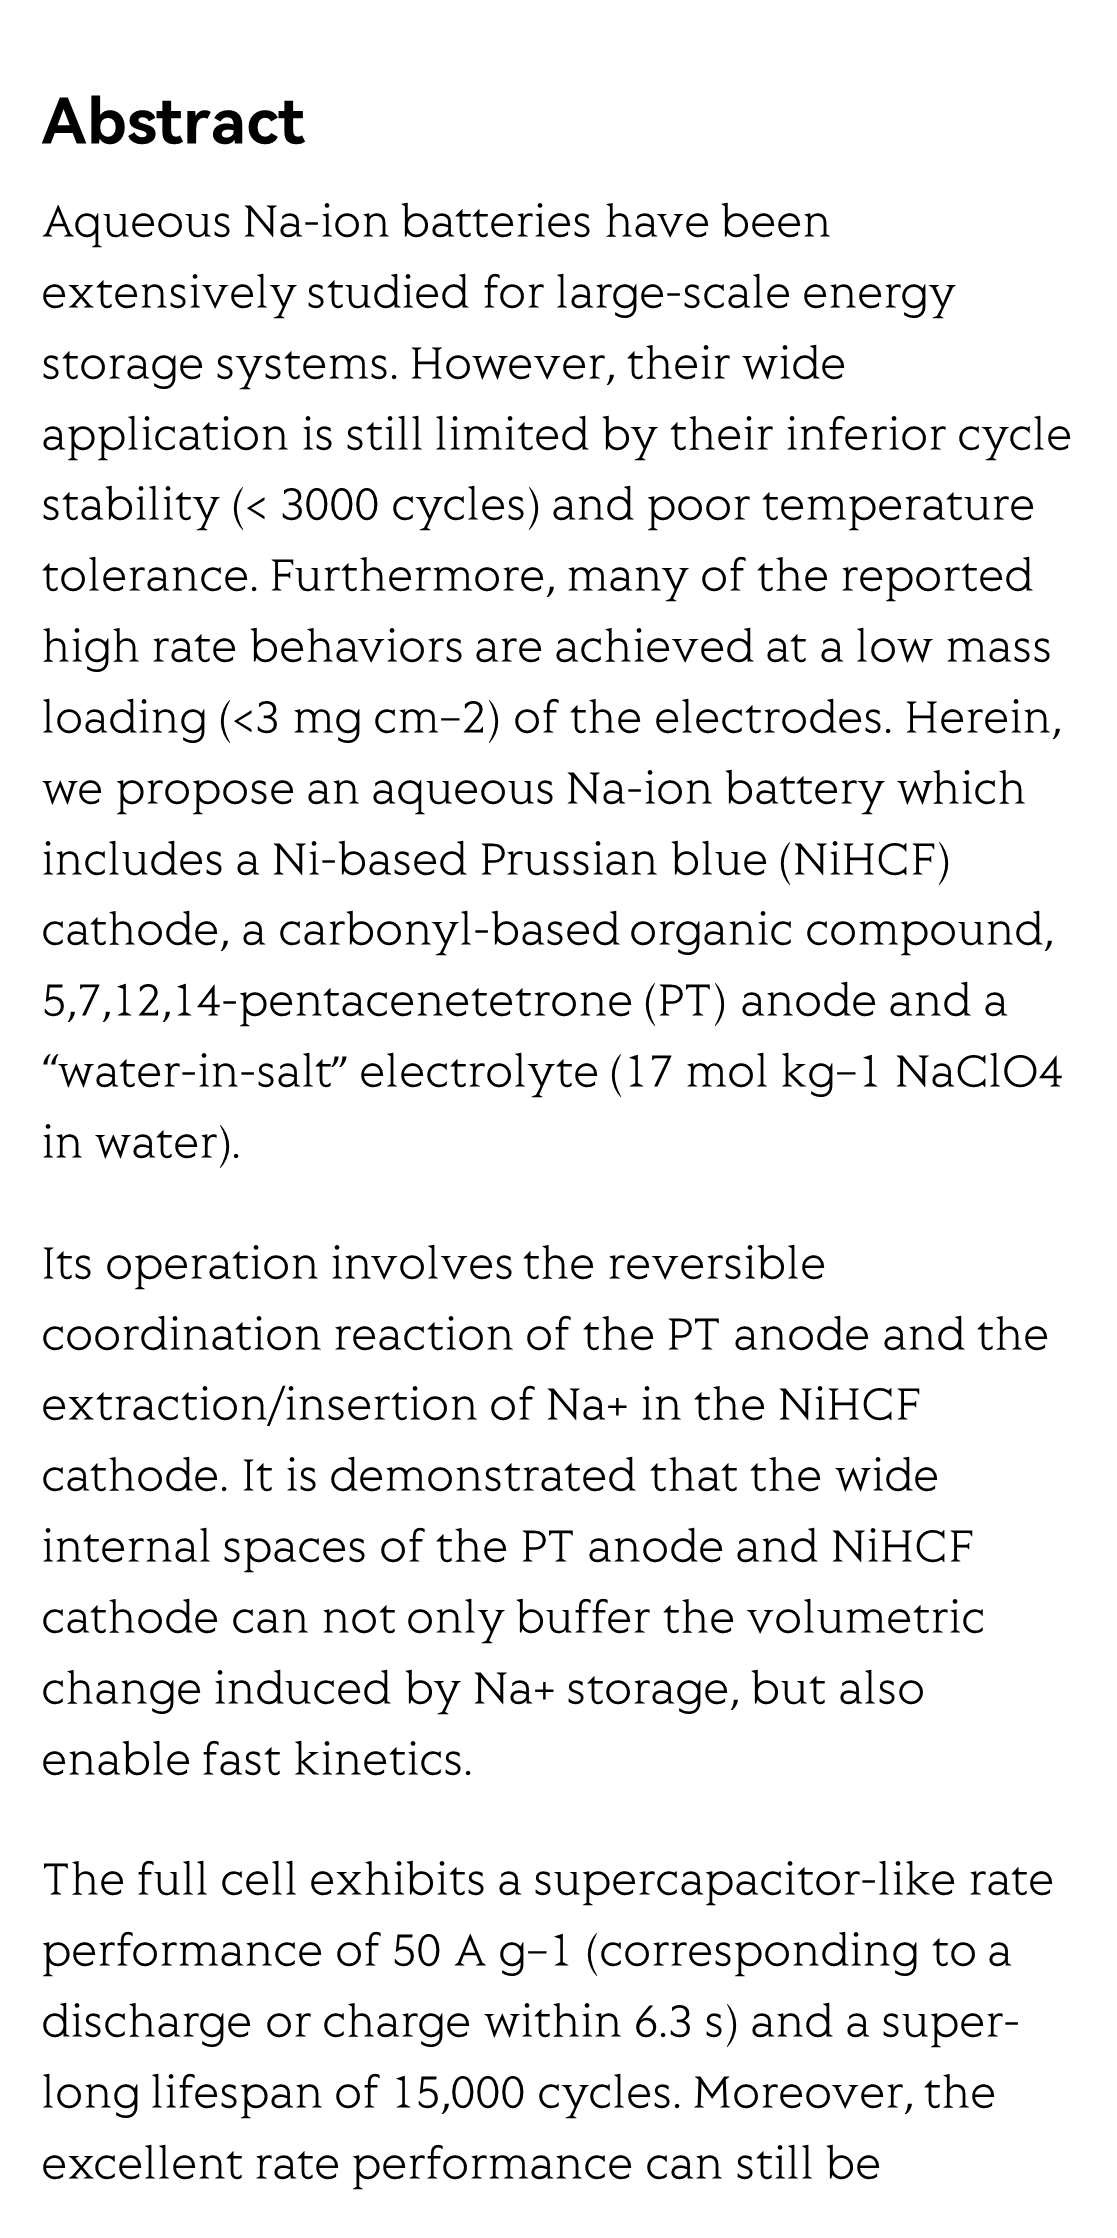 All-climate aqueous Na-ion batteries using “Water-in-Salt” electrolyte_2